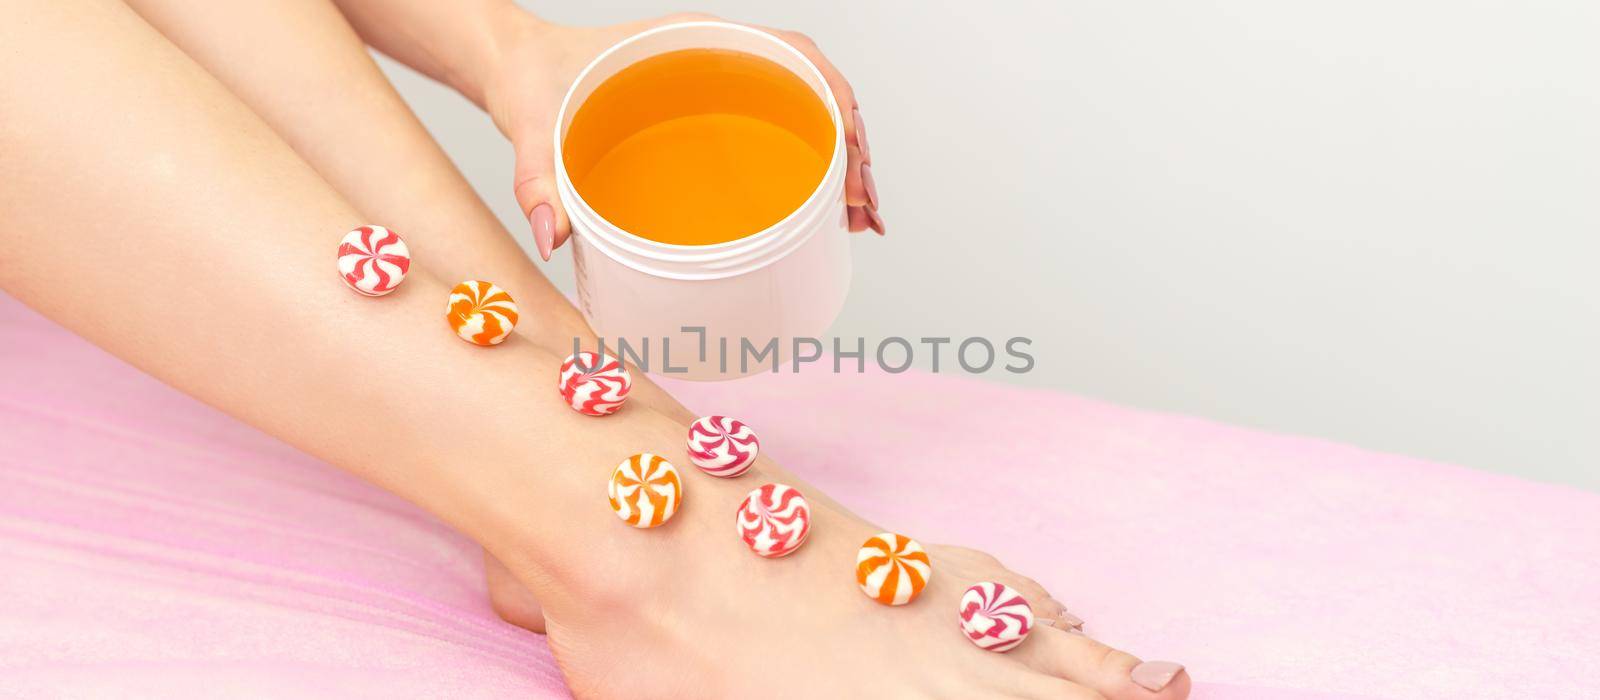 Depilation, waxing concept. Round candies lying down in a row on the female leg with a jar of sugar paste, close up. by okskukuruza